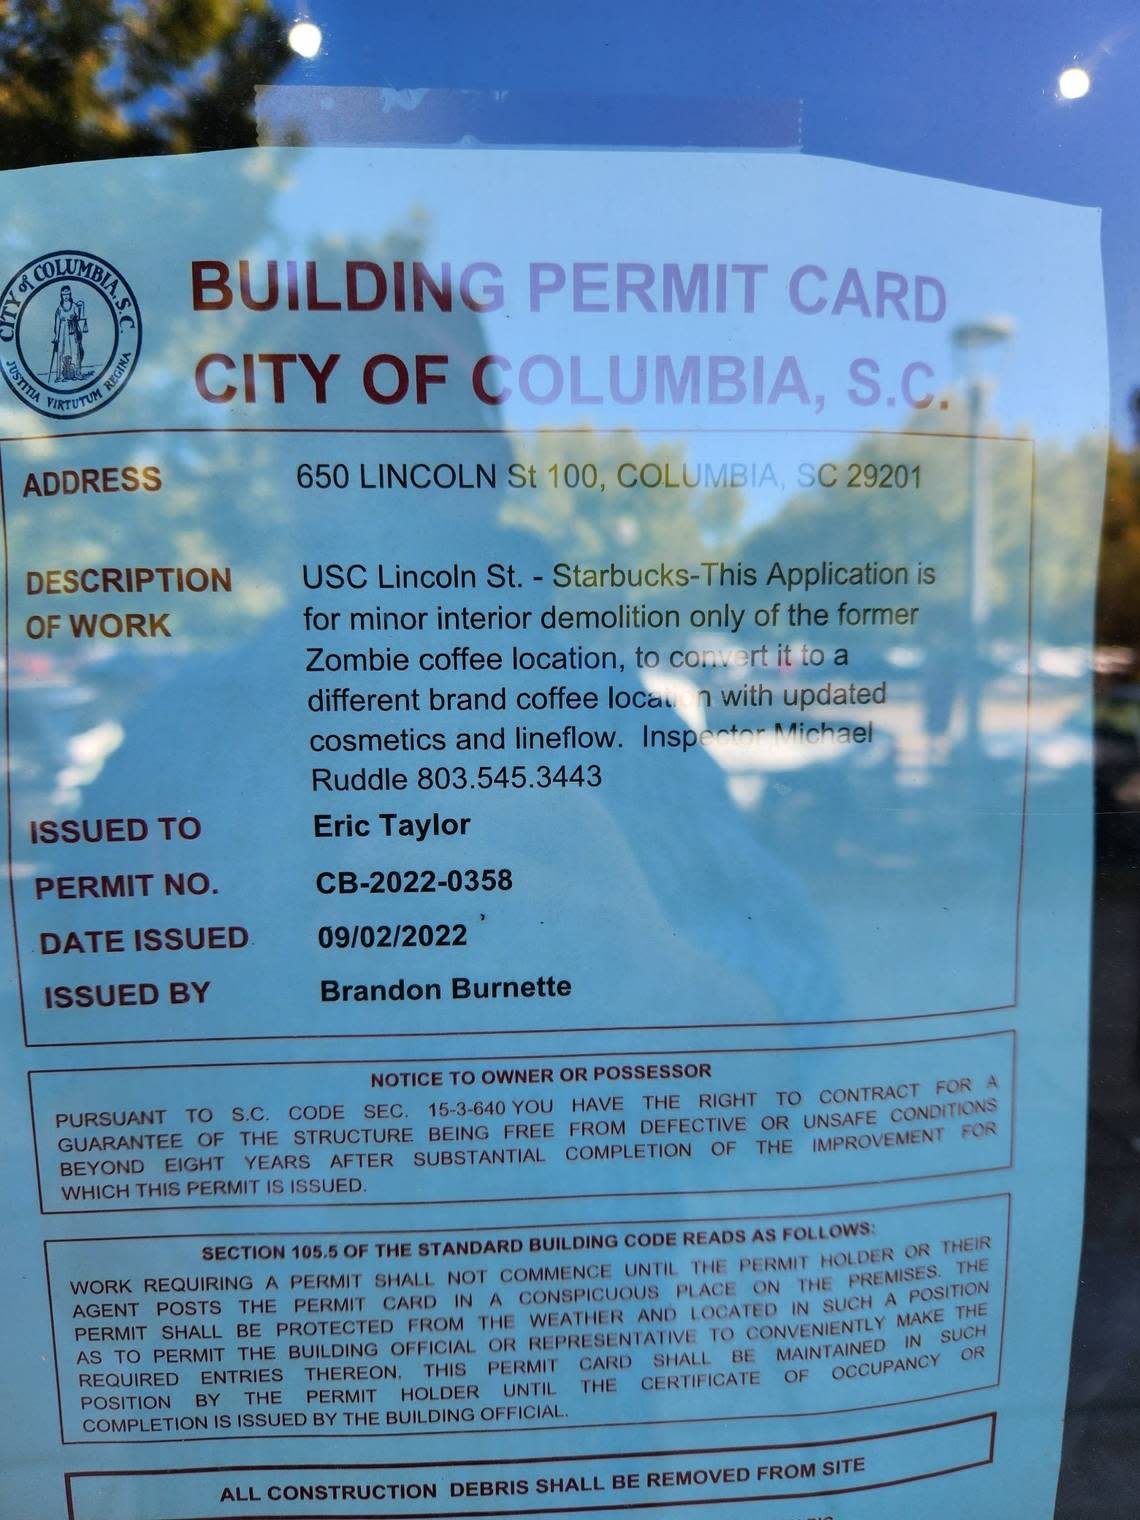 A city of Columbia building permit for a Starbucks at 650 Lincoln.